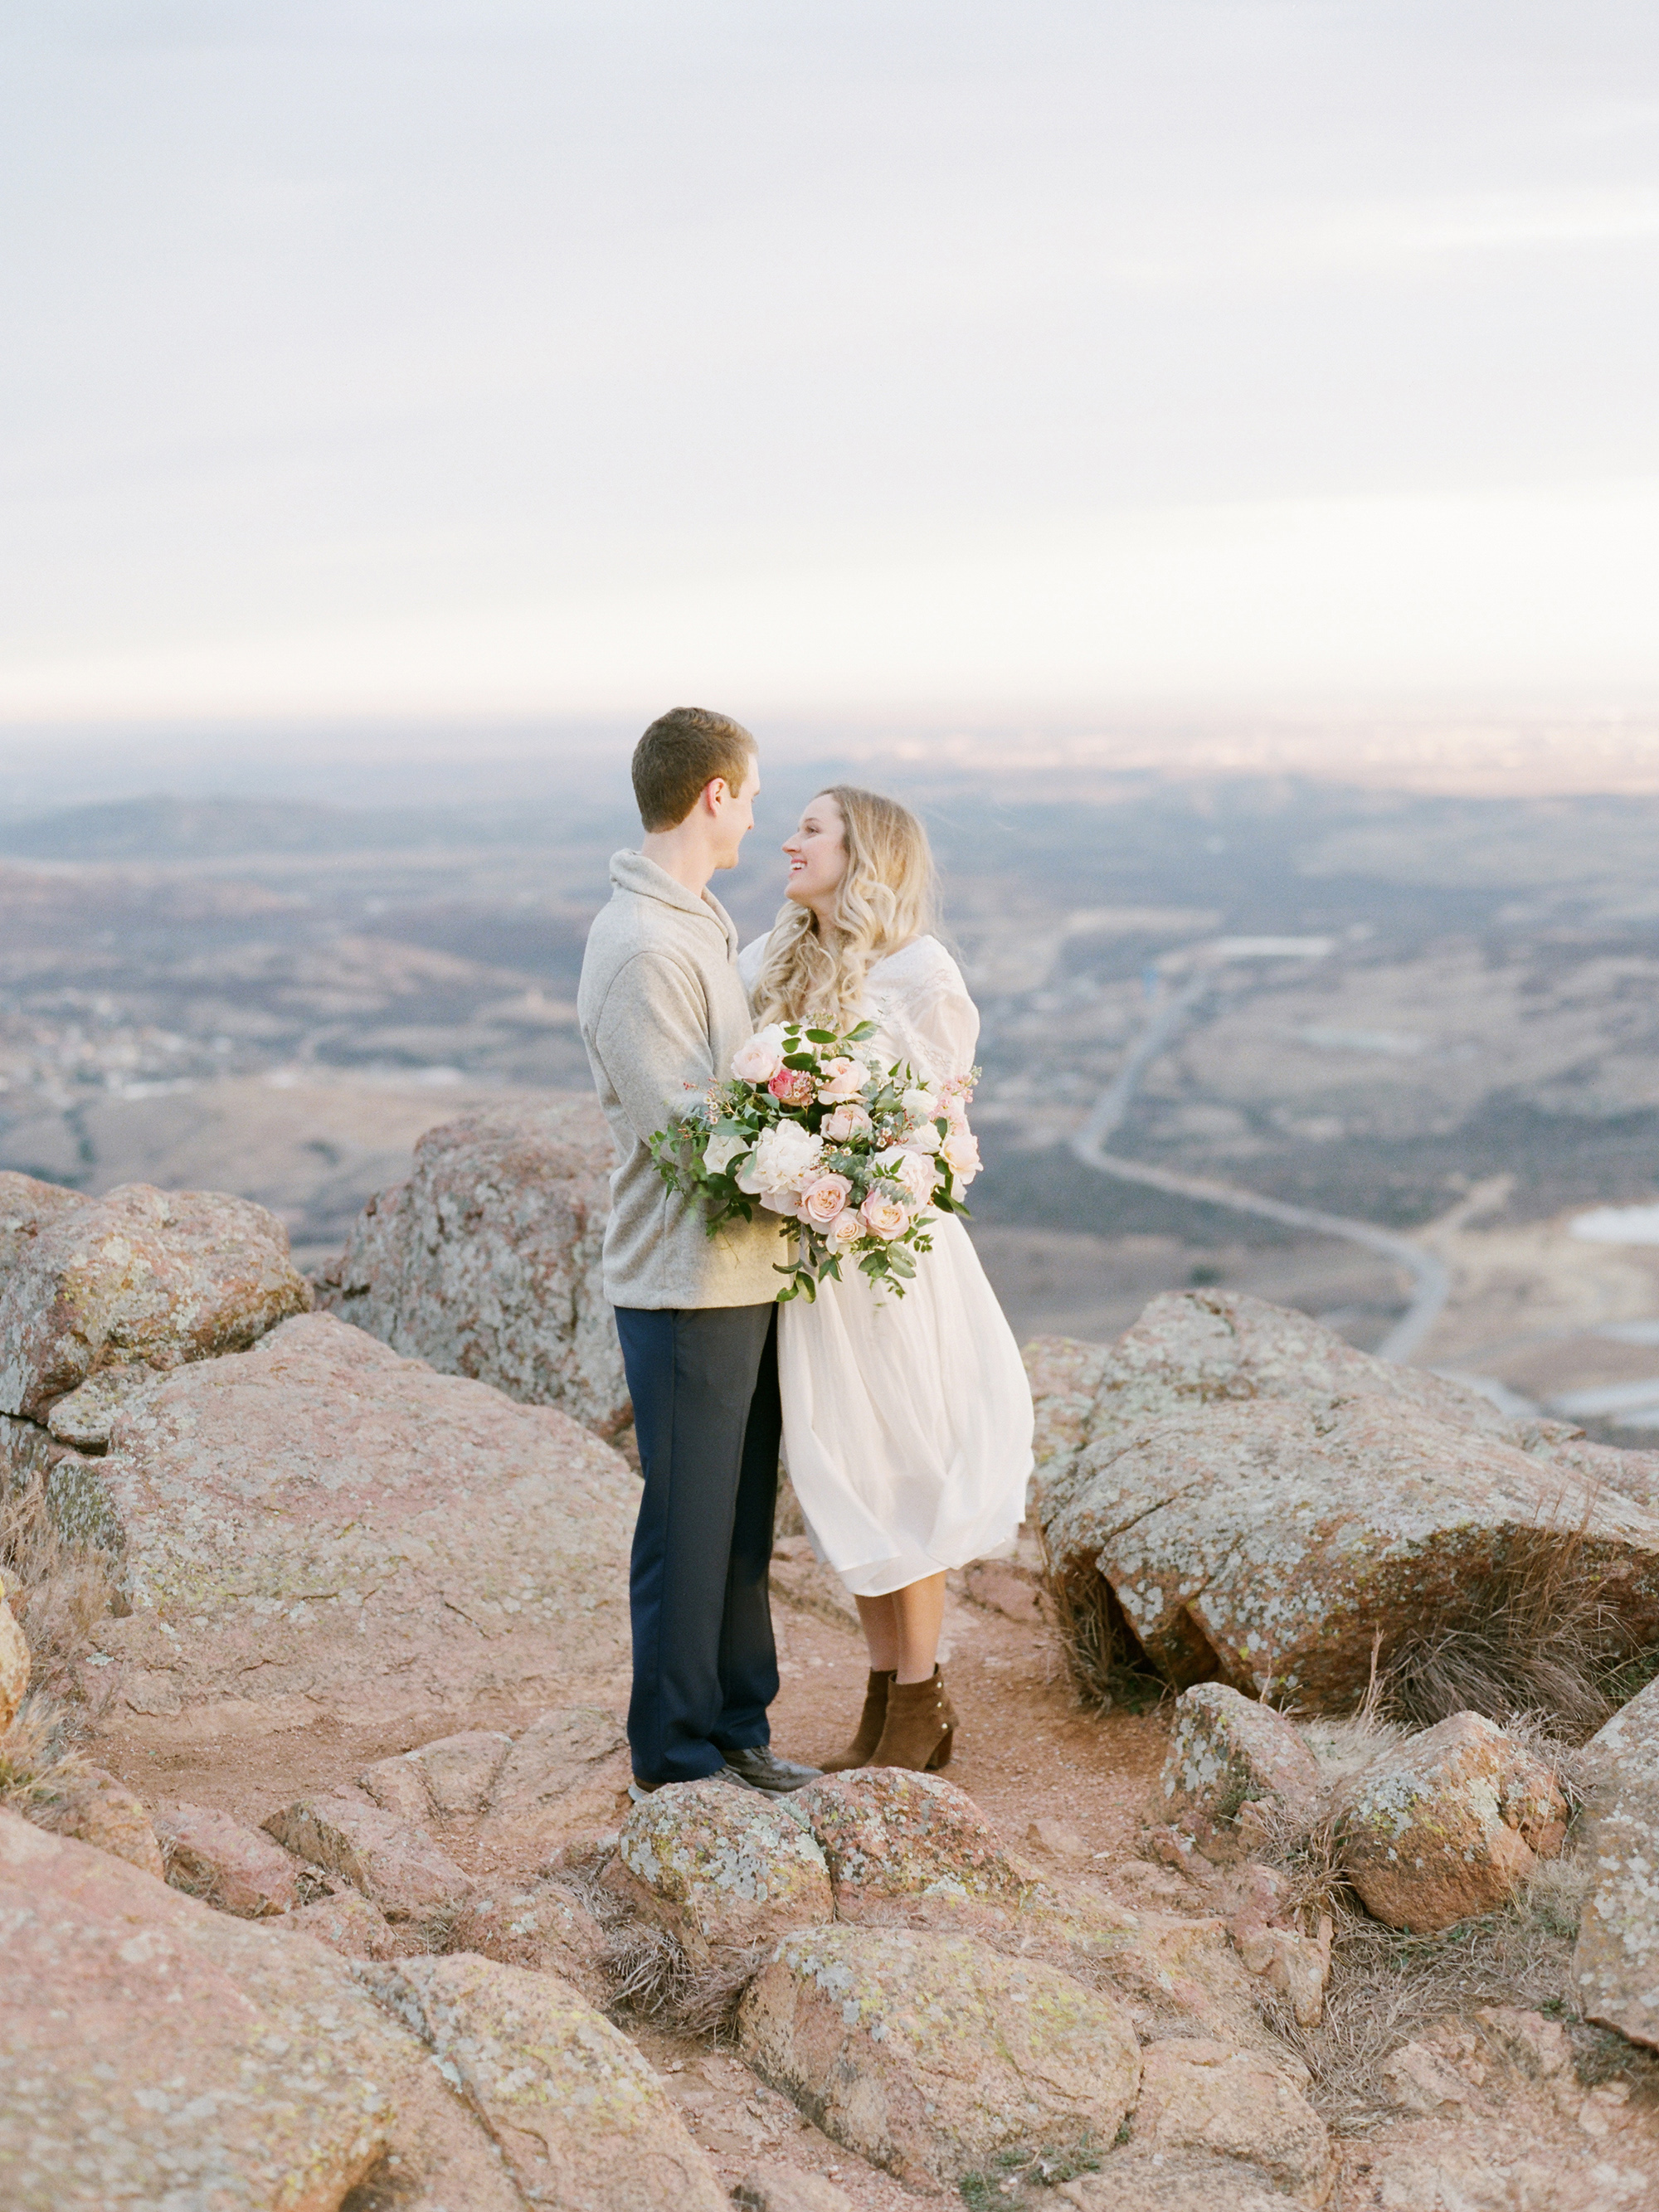 Winter engagement session inspiration by White Sparrow Barn Wedding Photographer Tenth & Grace